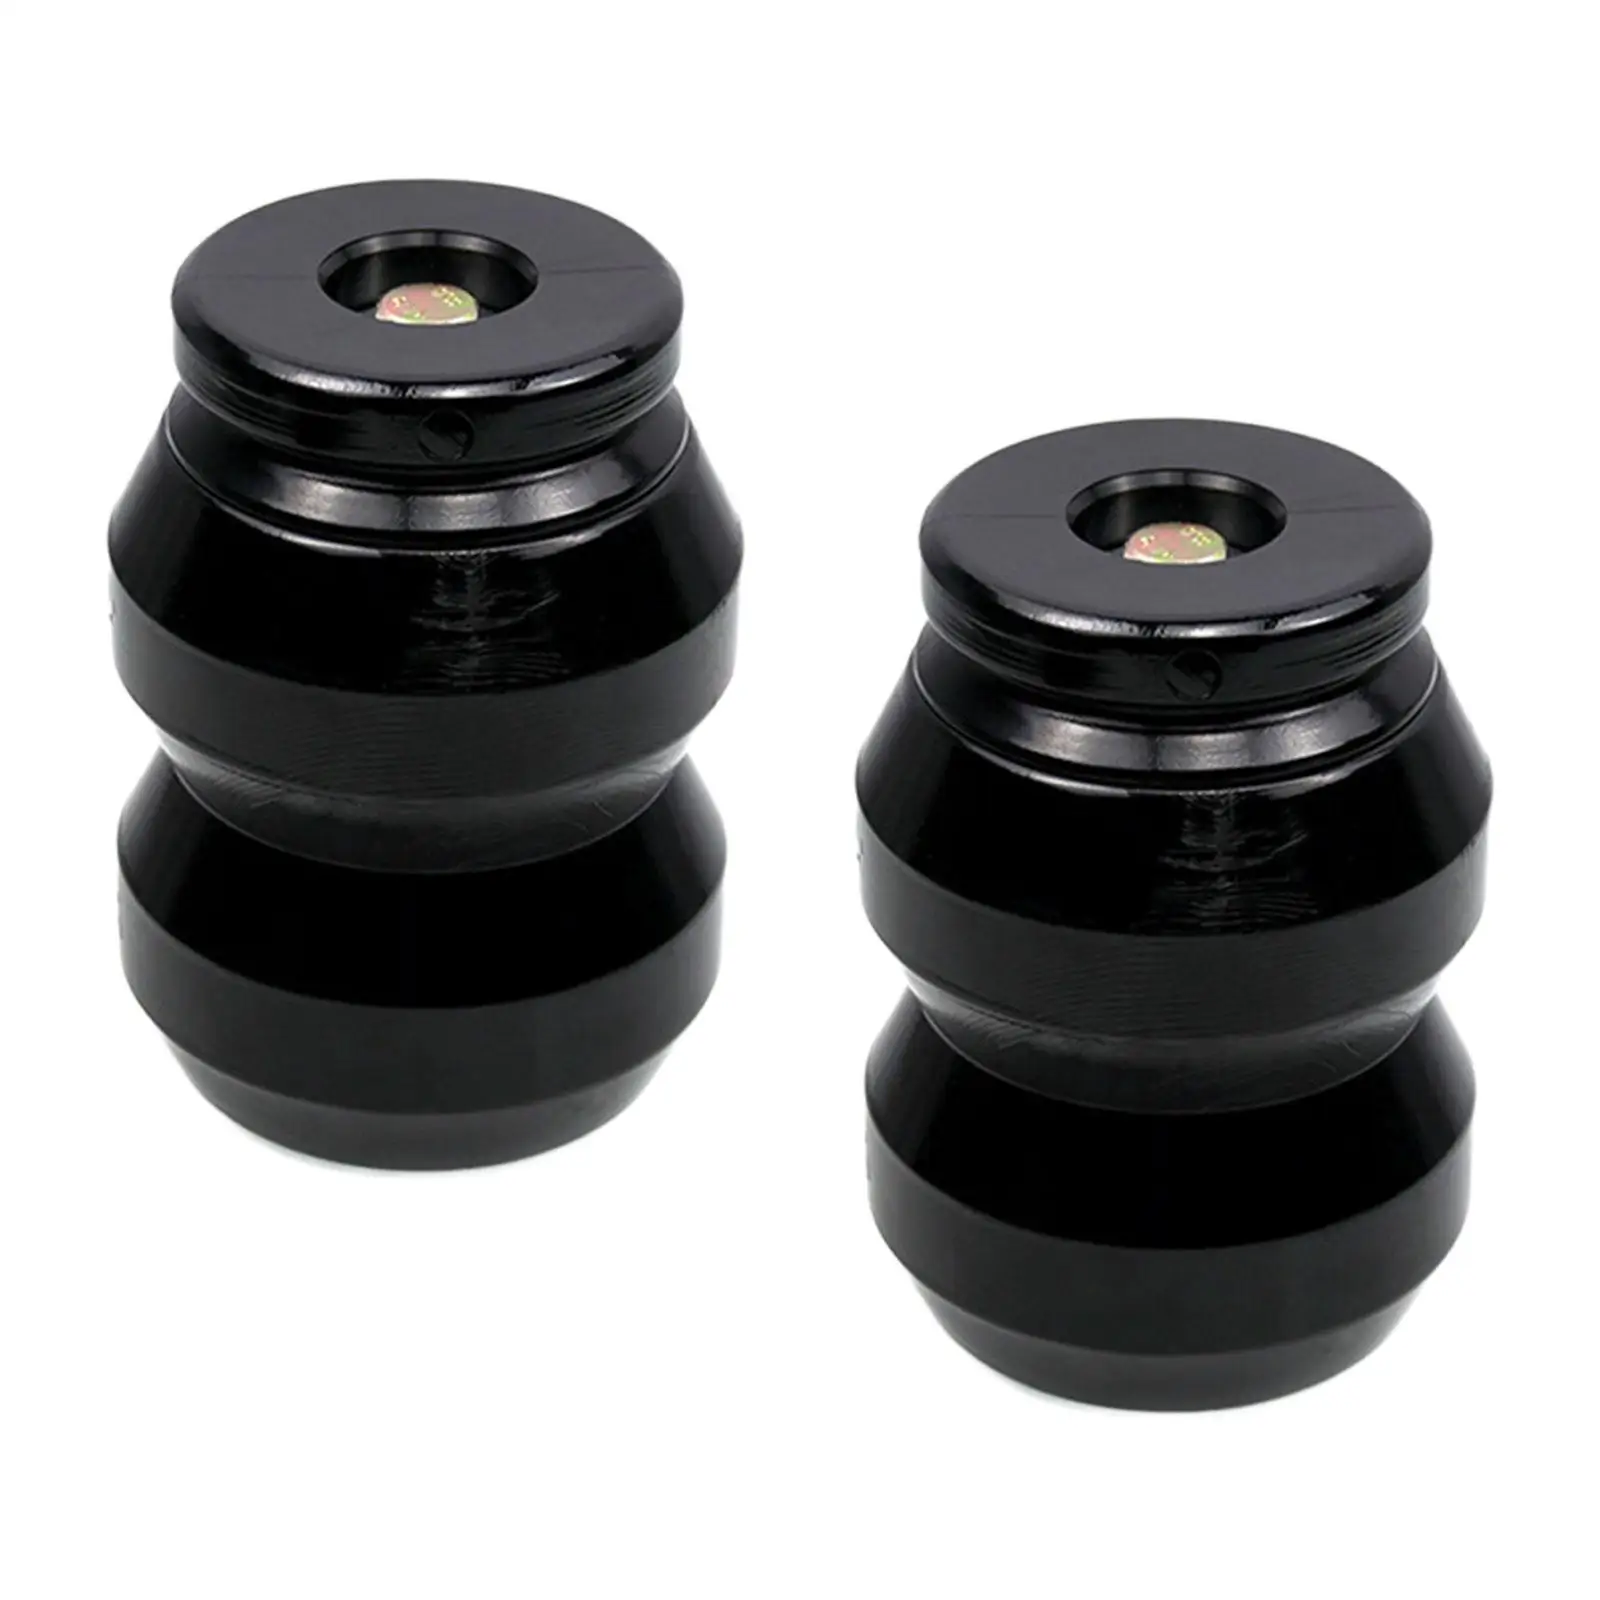 2x Suspension Enhancement System DR1500dq Rubber High Quality Directly Replace for Dodge RAM 1500 2009-2021 Accessories